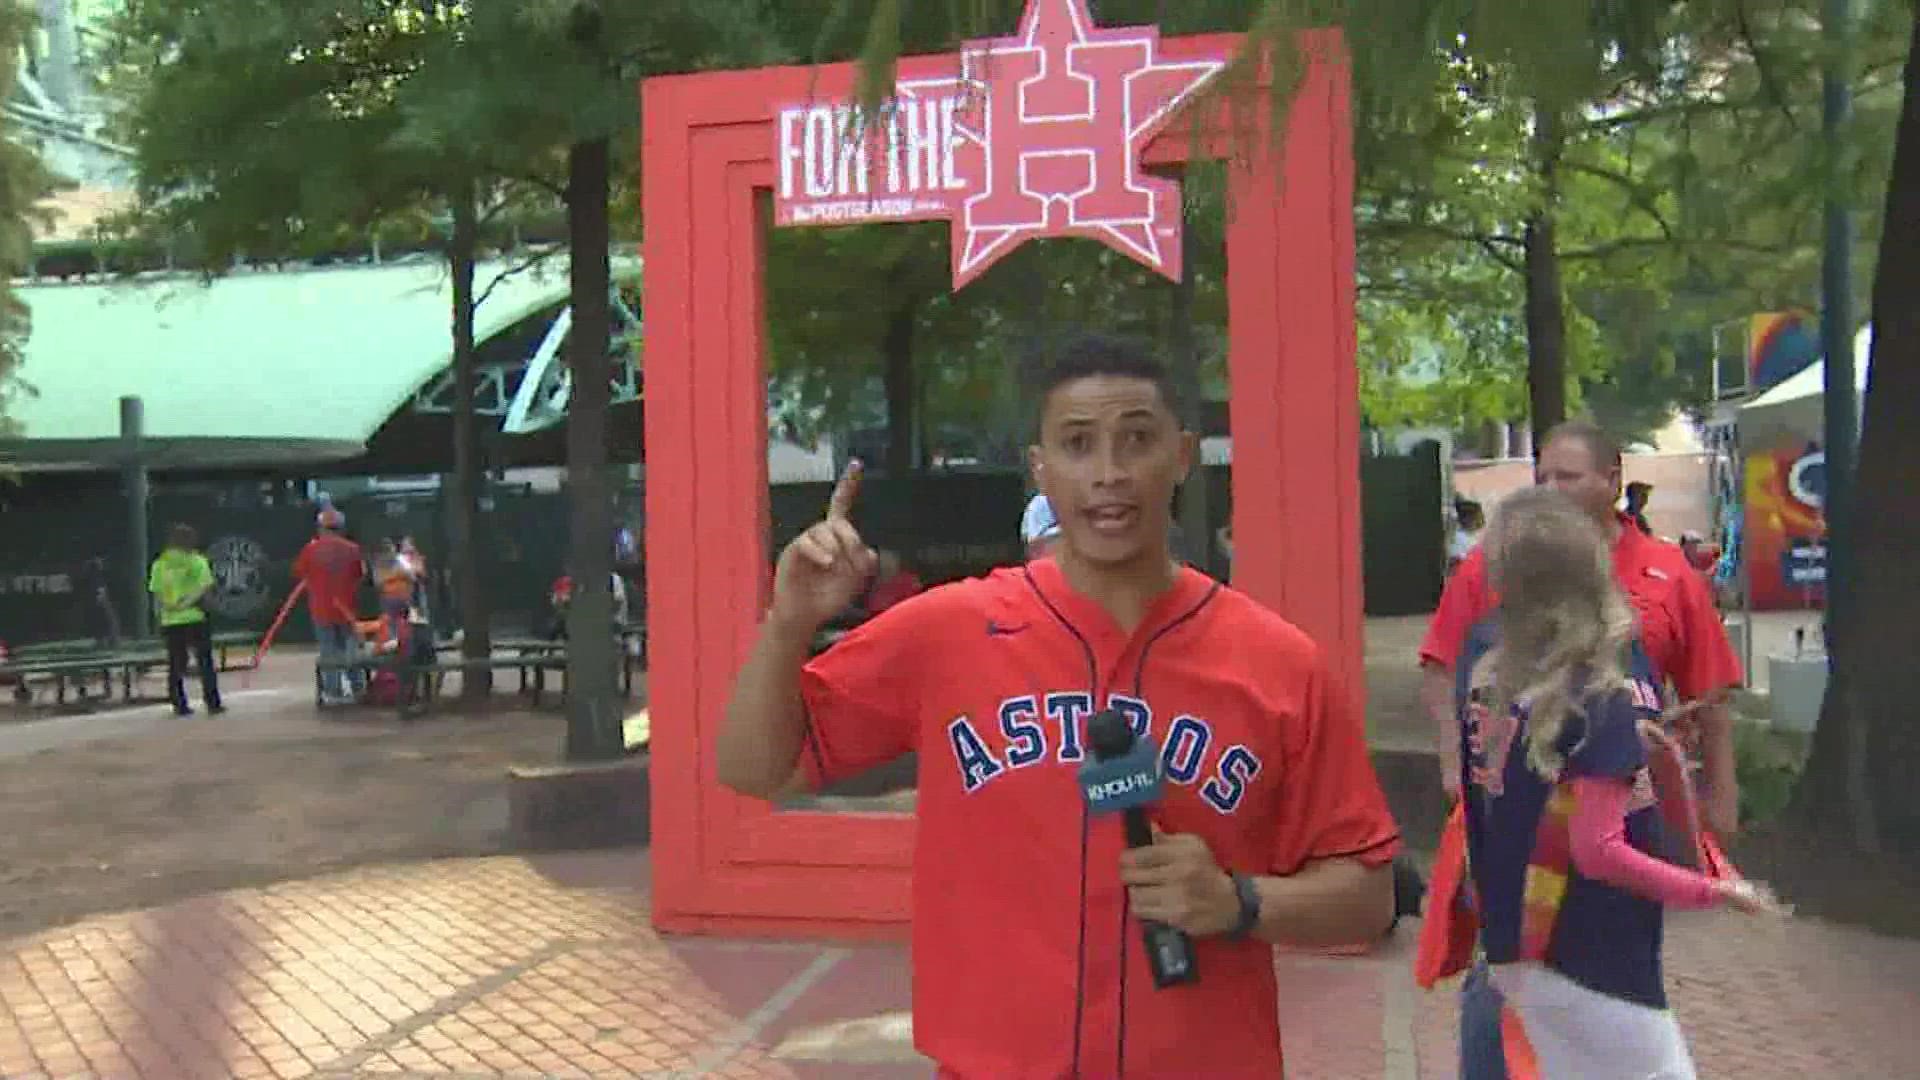 Hundreds of fans crowded around Minute Maid Park for "Street Fest" to cheer on the Astros in Game 6 of the ALCS.